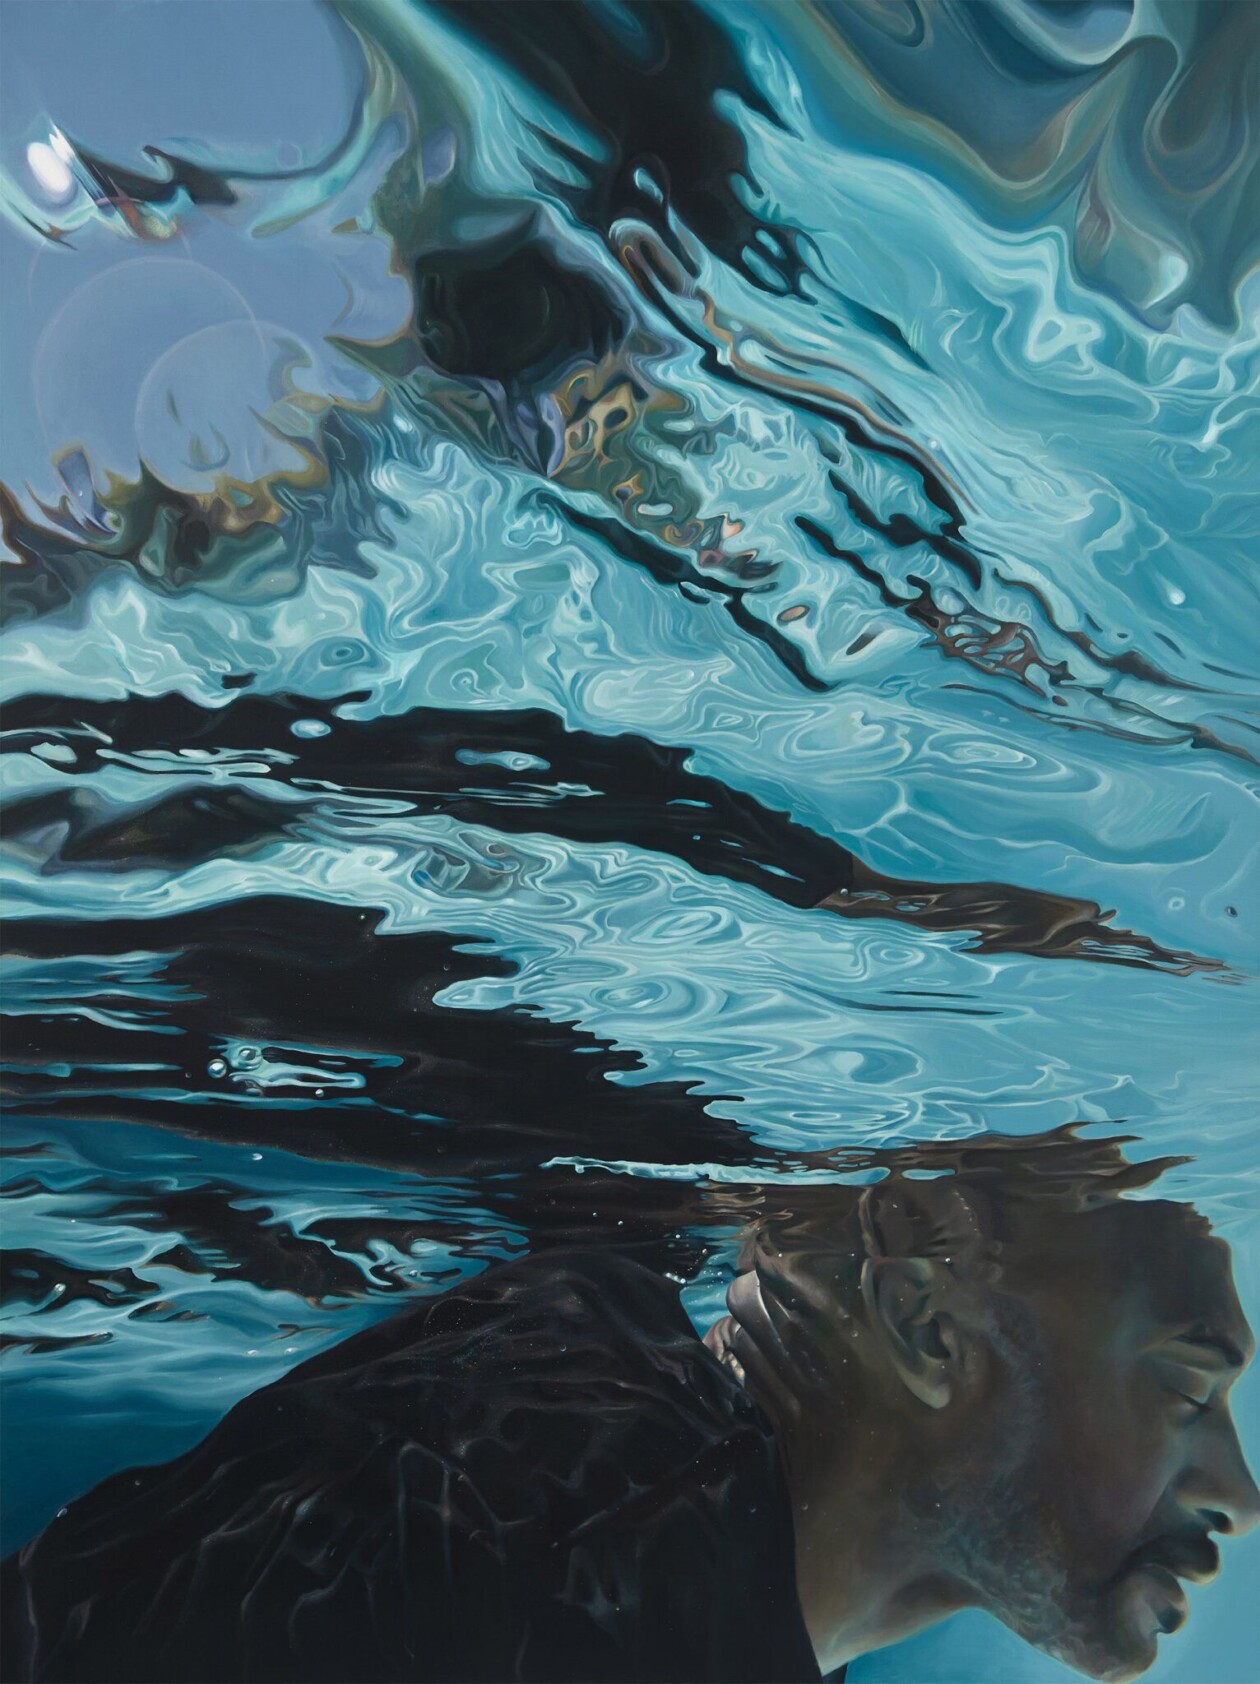 Photorealistic Paintings Of Contemplative And Serene Swimmers By Calida Rawles (11)